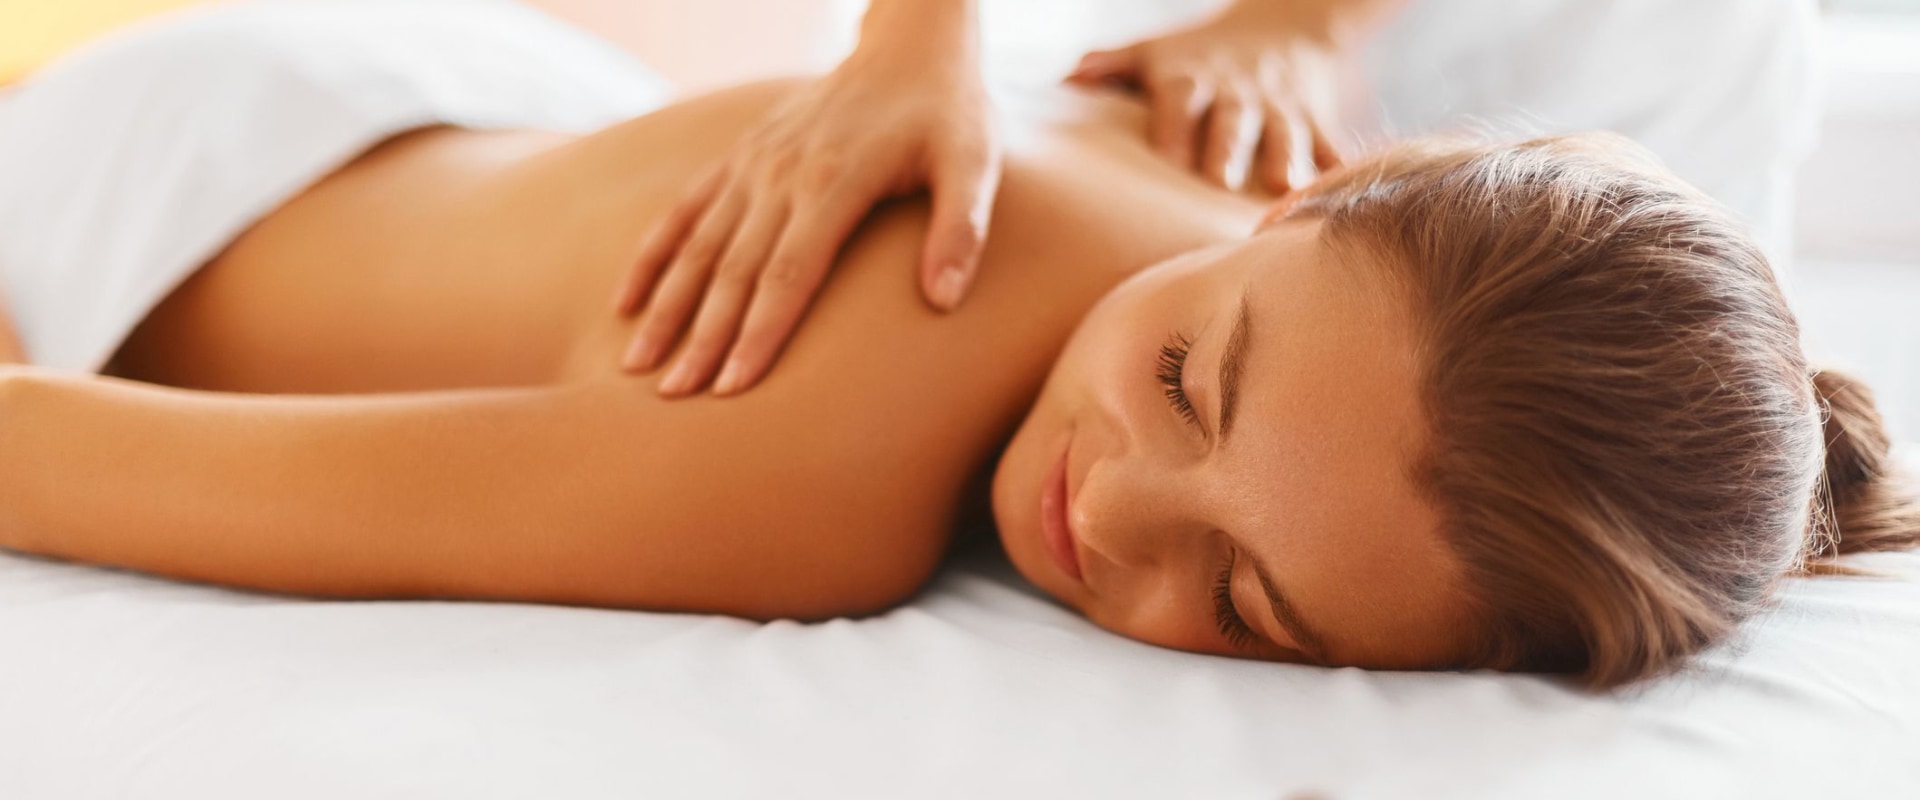 What is the main purpose of massage therapy?